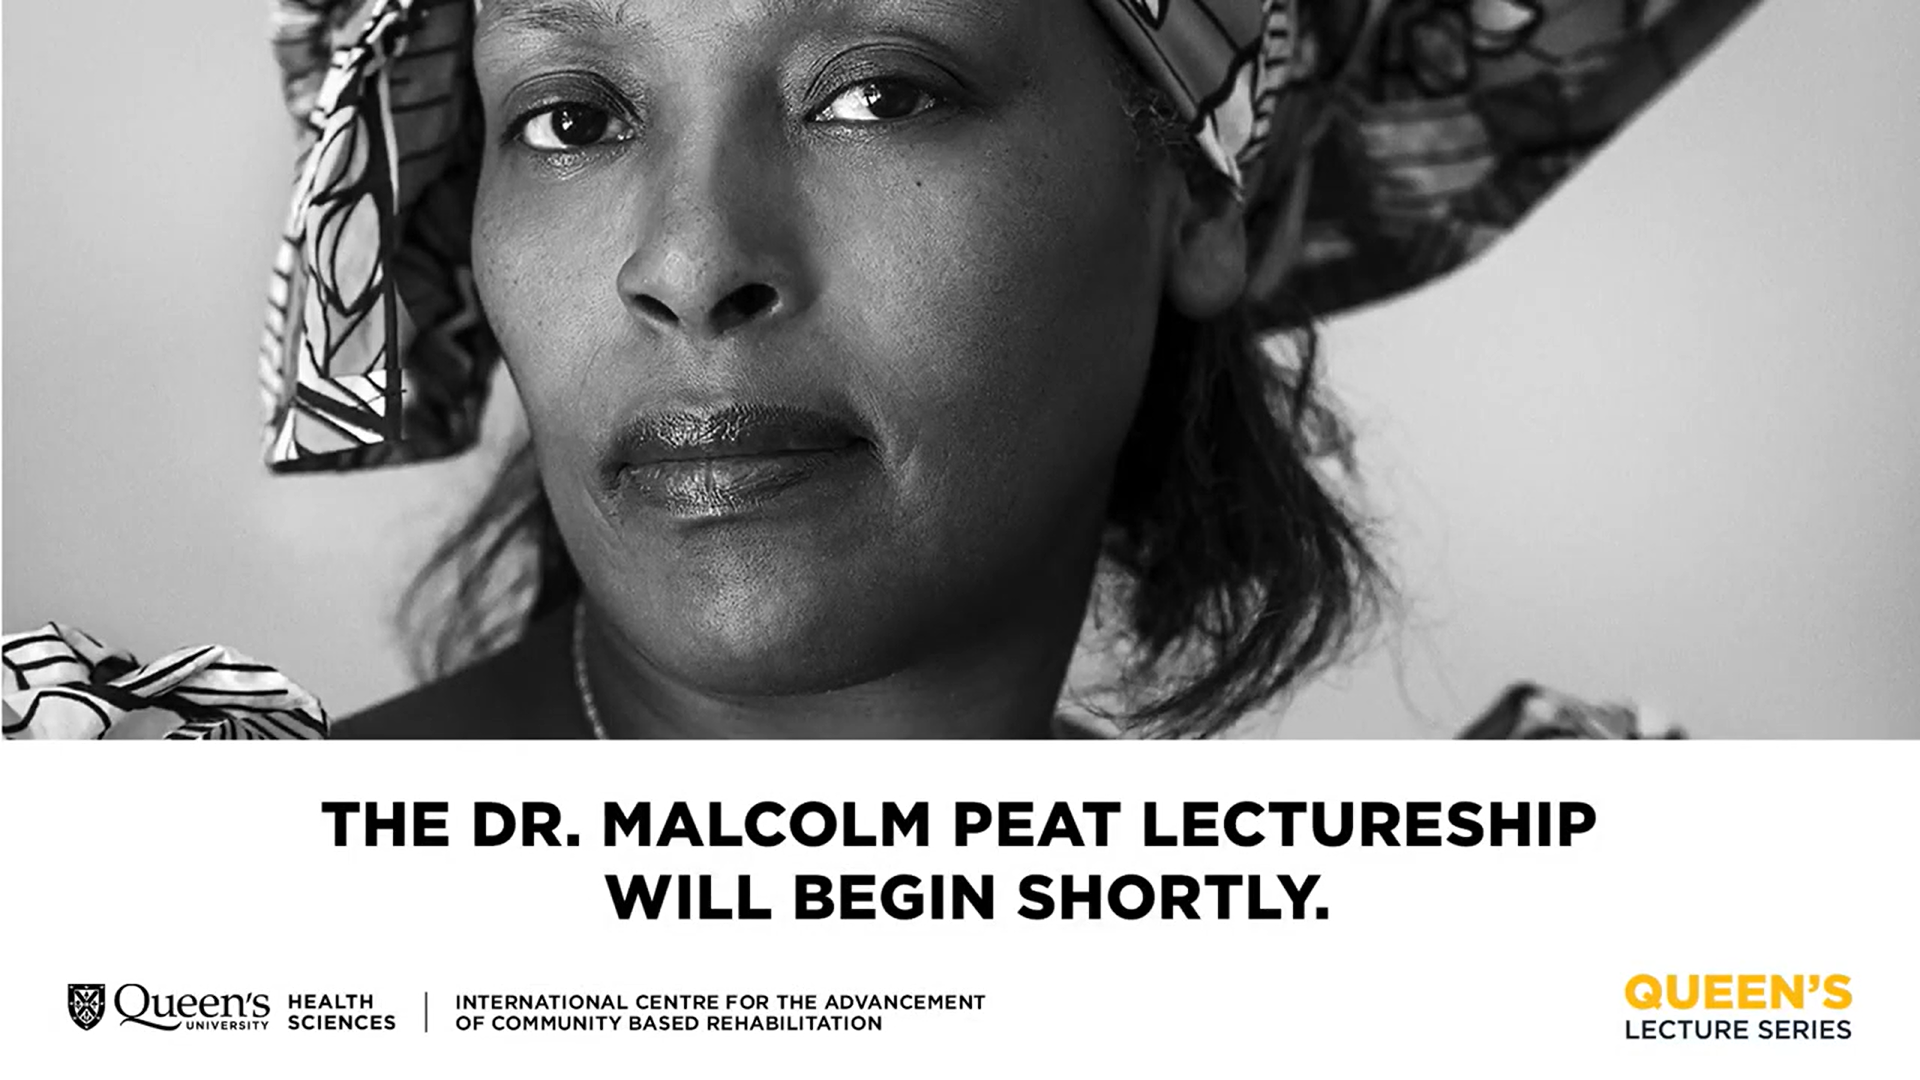 The 5th Annual Dr. Malcolm Peat Lectureship with Neema Namadamu